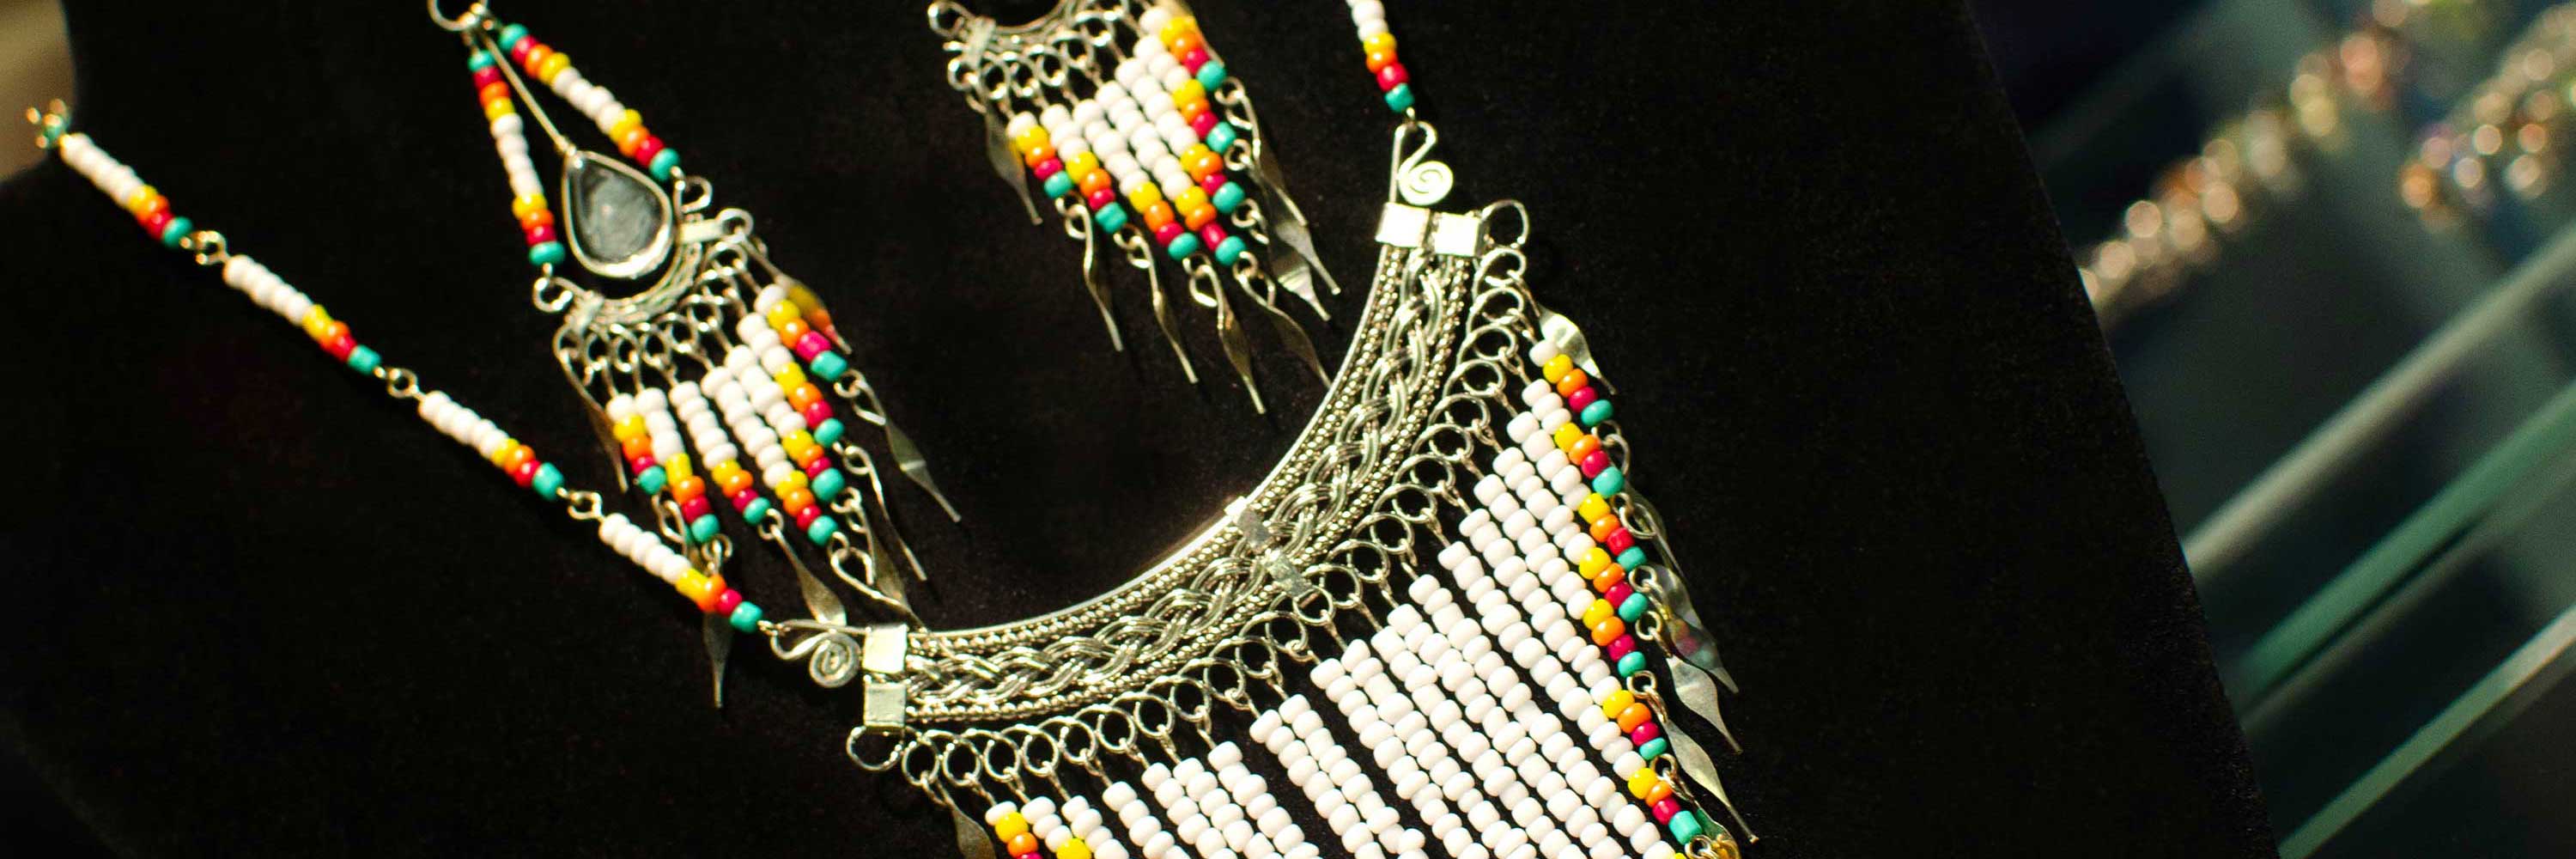 A photo of beaded jewelry